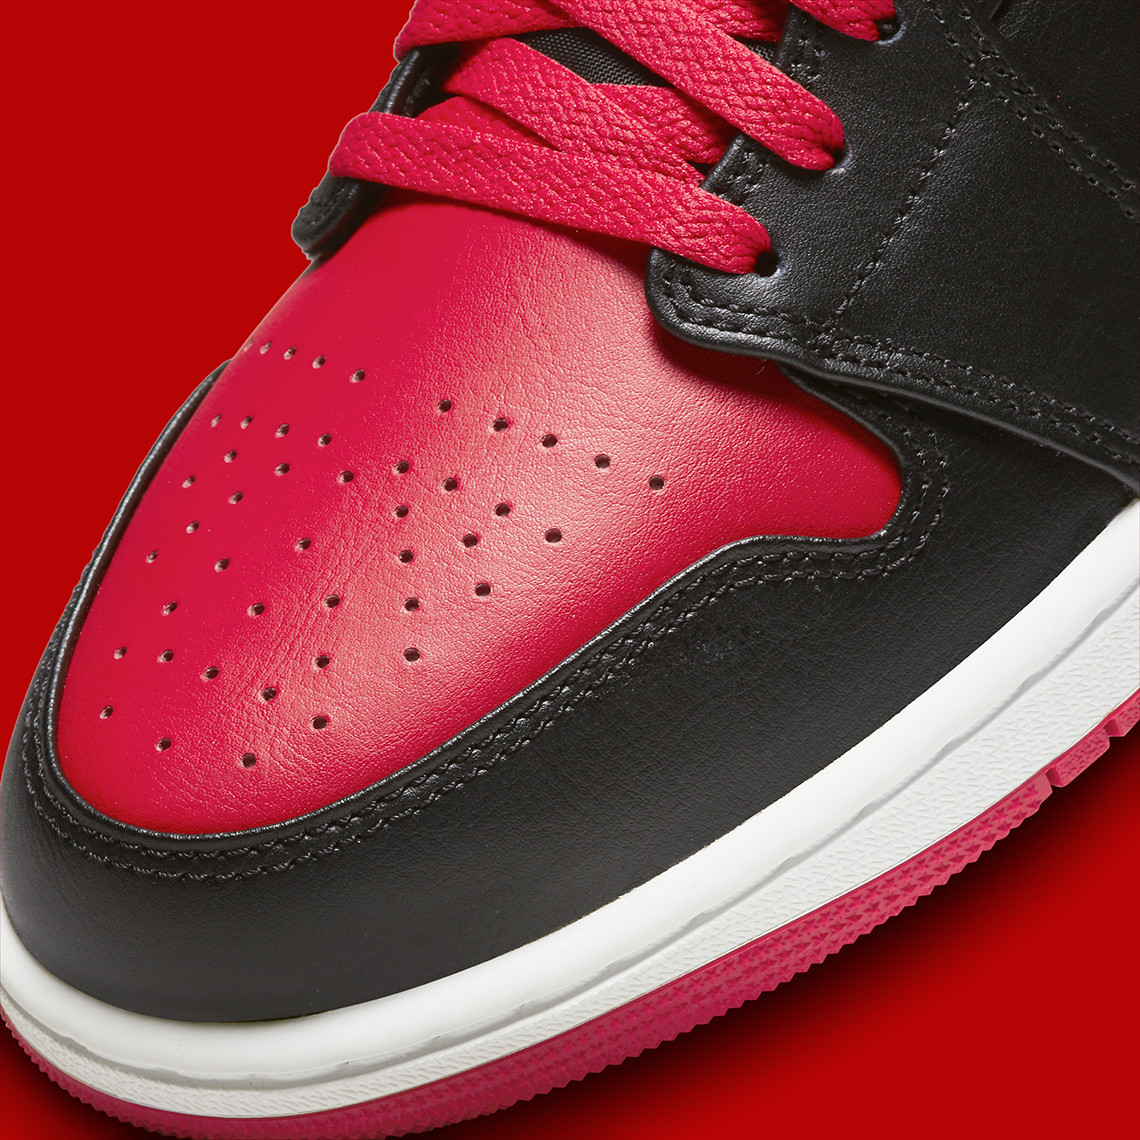 Jordan Brand is set to launch their latest Bred Dq8426 060 5